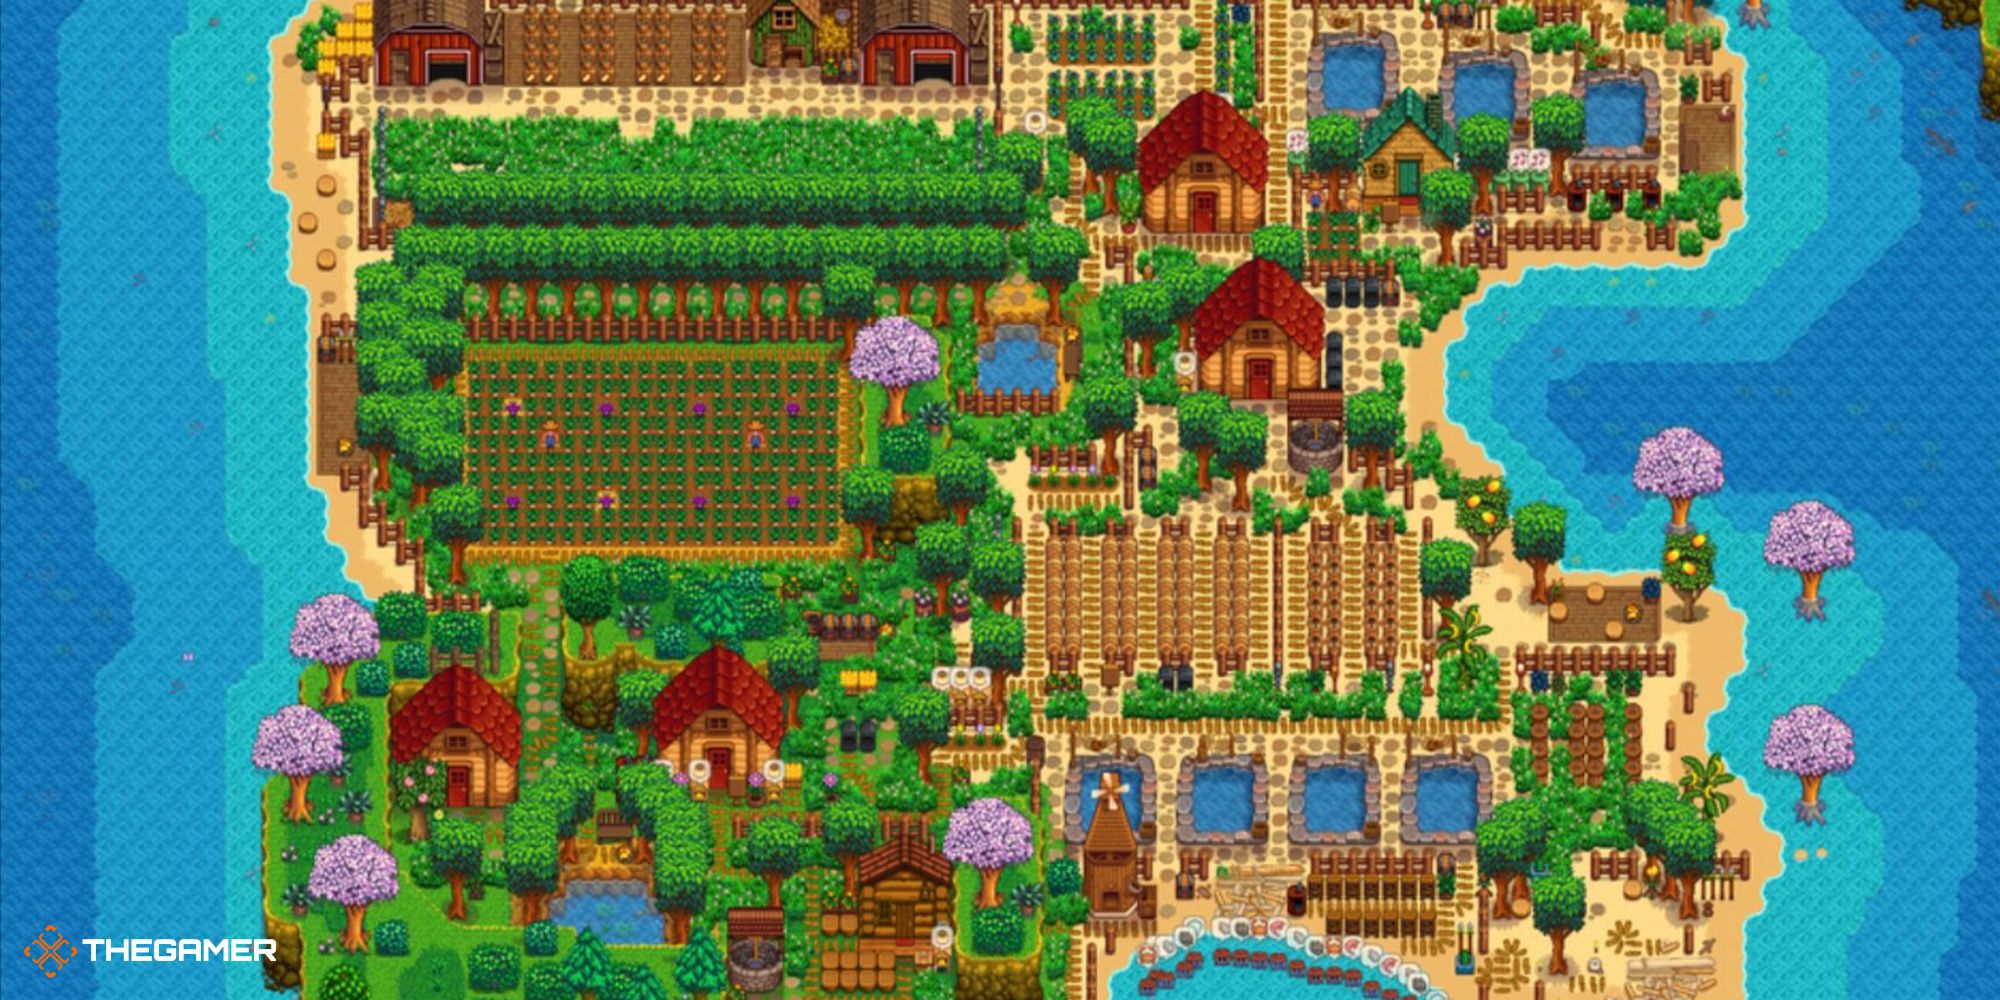 A fully-used Beach Farm in Stardew Valley filled with crops and storage sheds